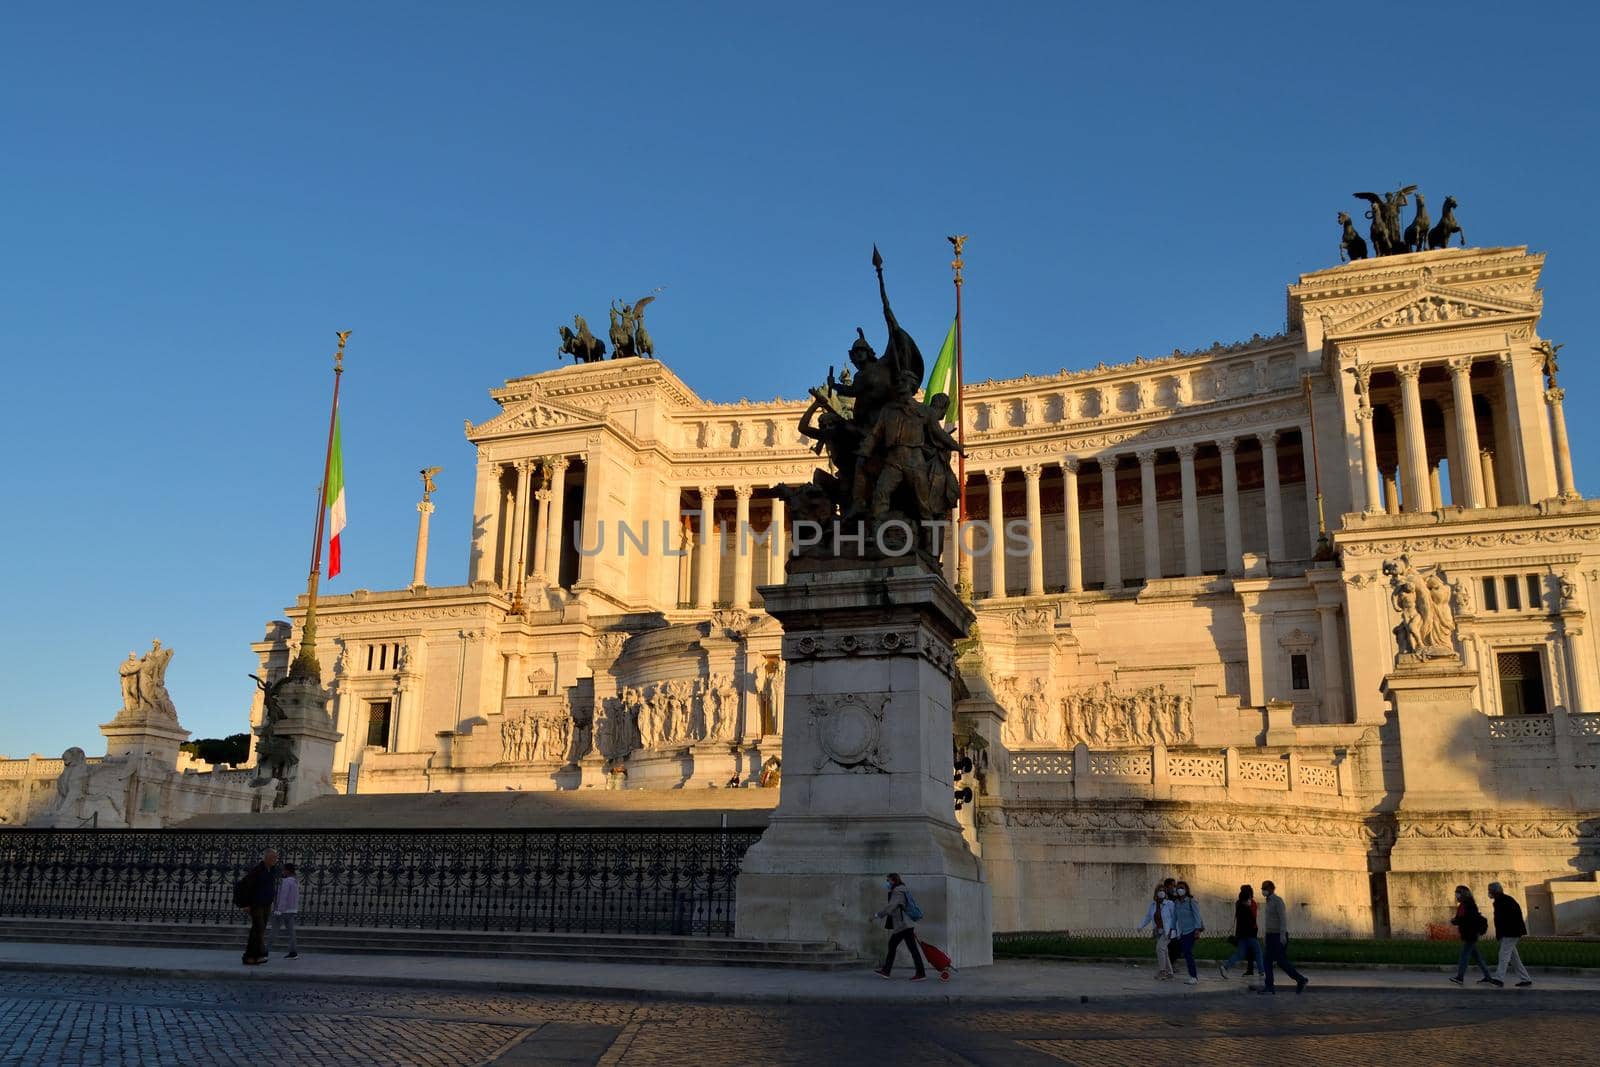 May 12th 2020, Rome, Italy: View of the Altar of the Fatherland without tourists due to phase 2 of the lockdown